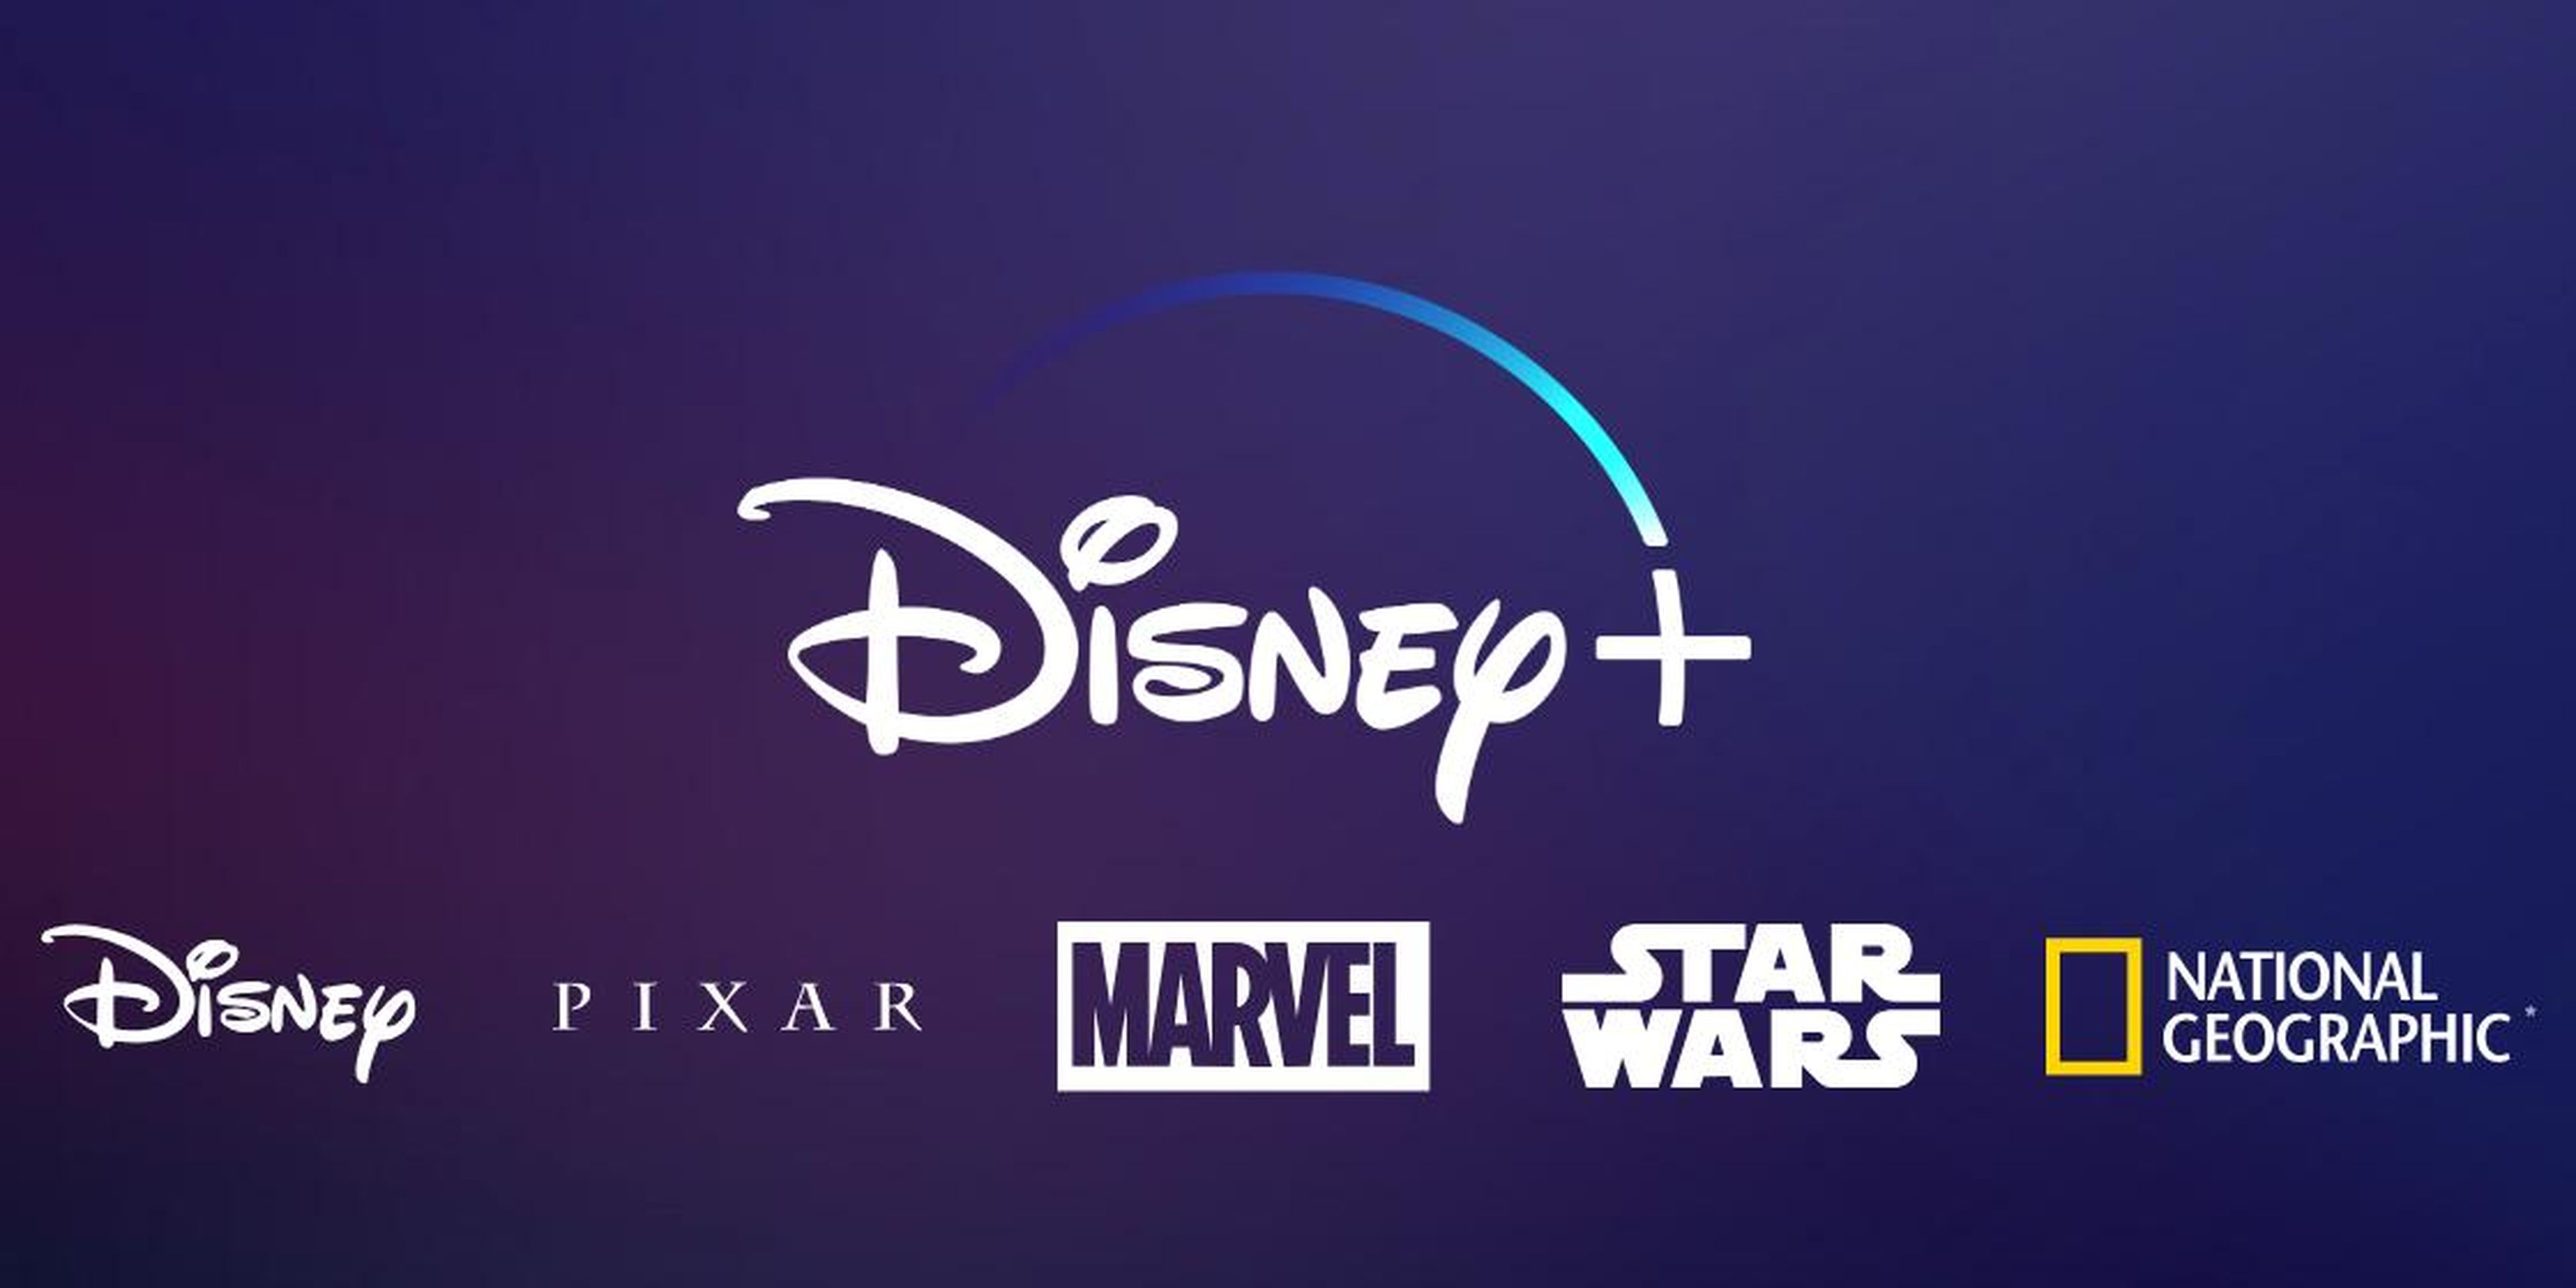 What do you think about Disney Plus?